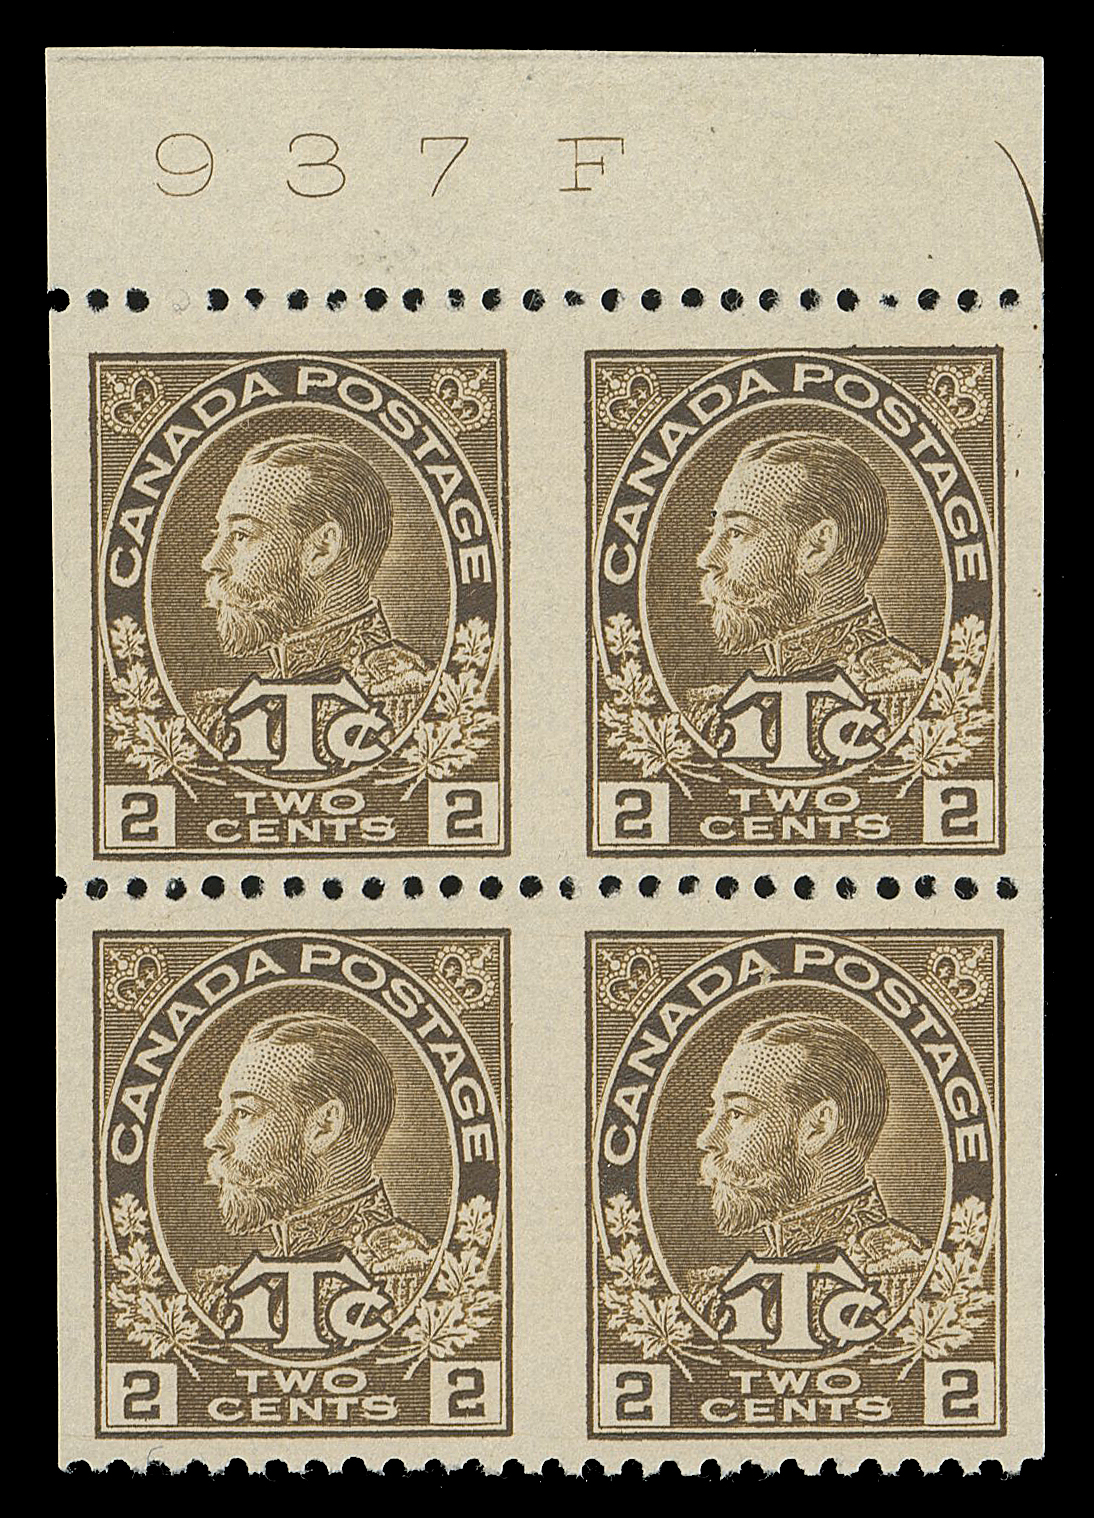 ADMIRAL STAMPS  MR4ii,A top margin block imperforate vertically, well centered and showing printing order number "937F" (from Plate 15 or 16) and portion of guide arrow at top, choice and appealing, VF (Unitrade cat. as two pairs alone)